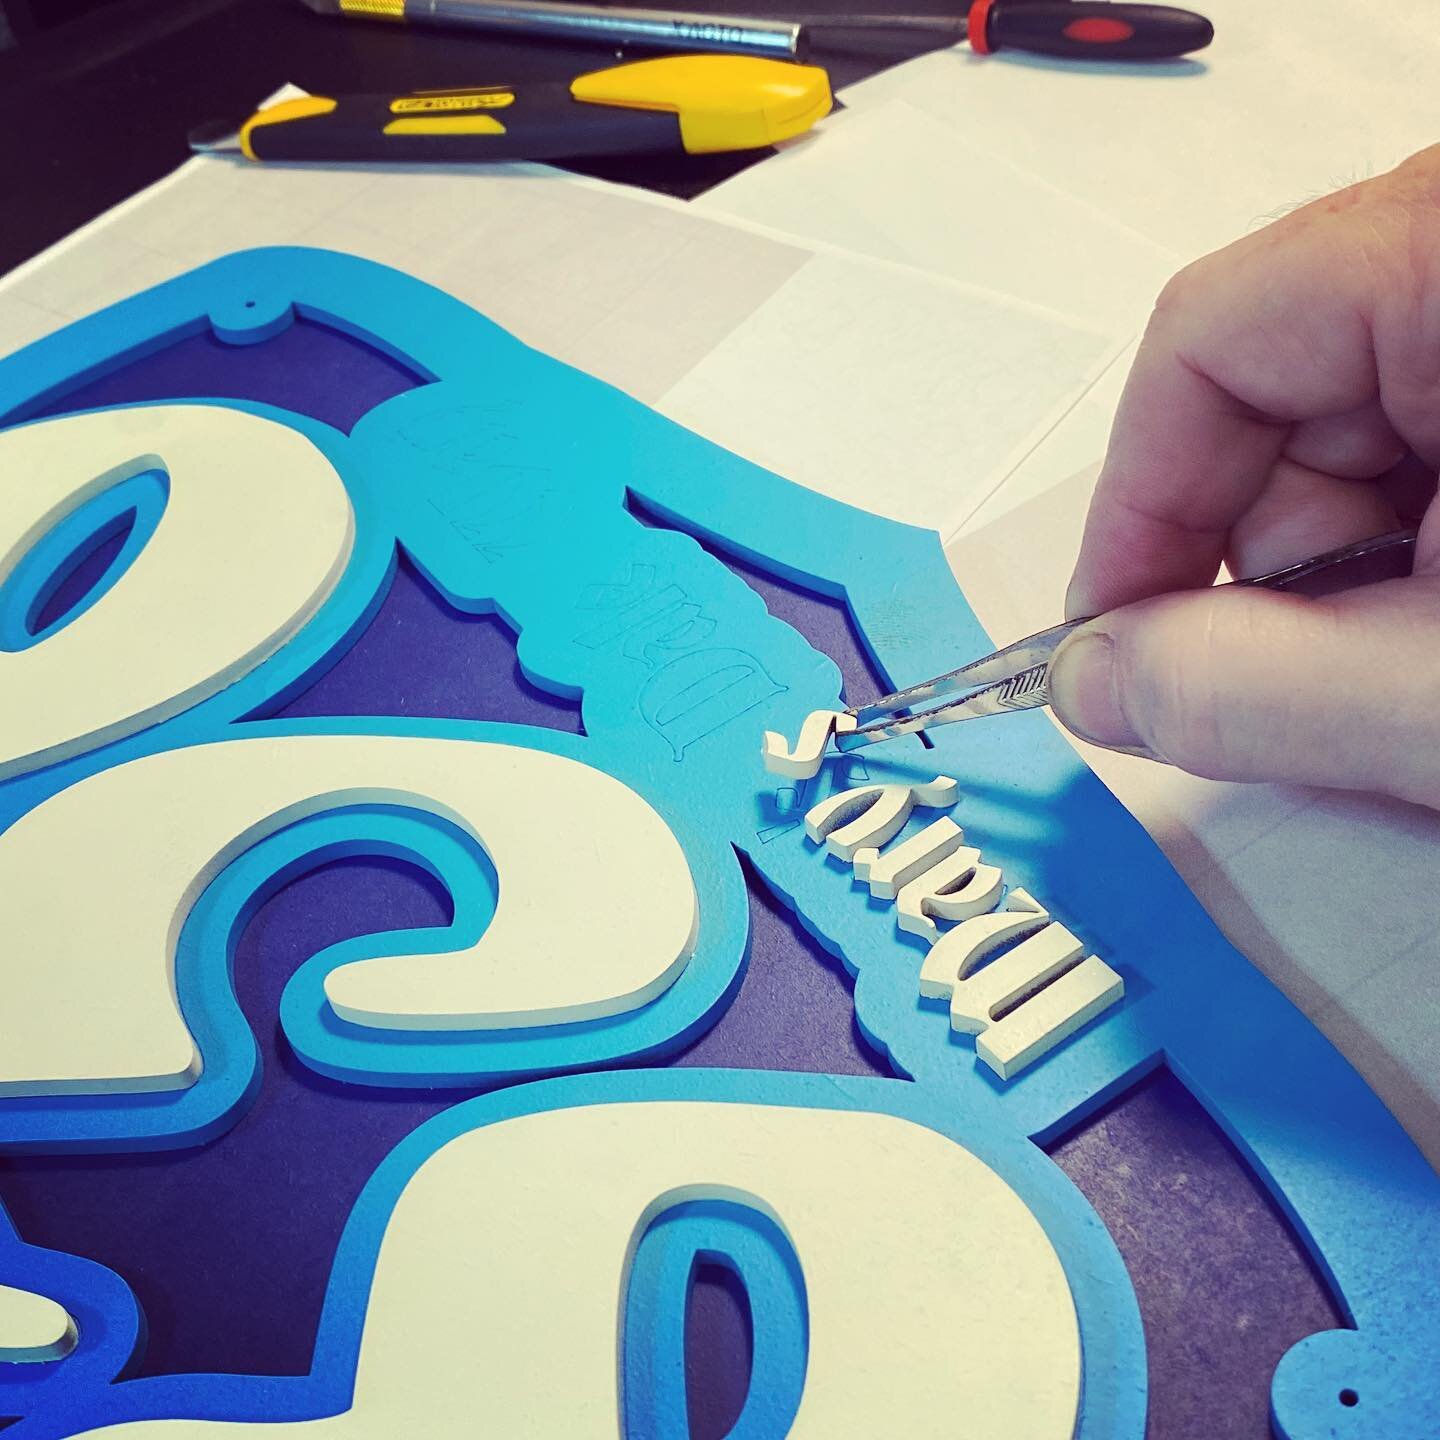 Today was like playing operation. Tweezers and small pieces while glueing our MD booth number sign together. #836 Mary&rsquo;s Dale Way.